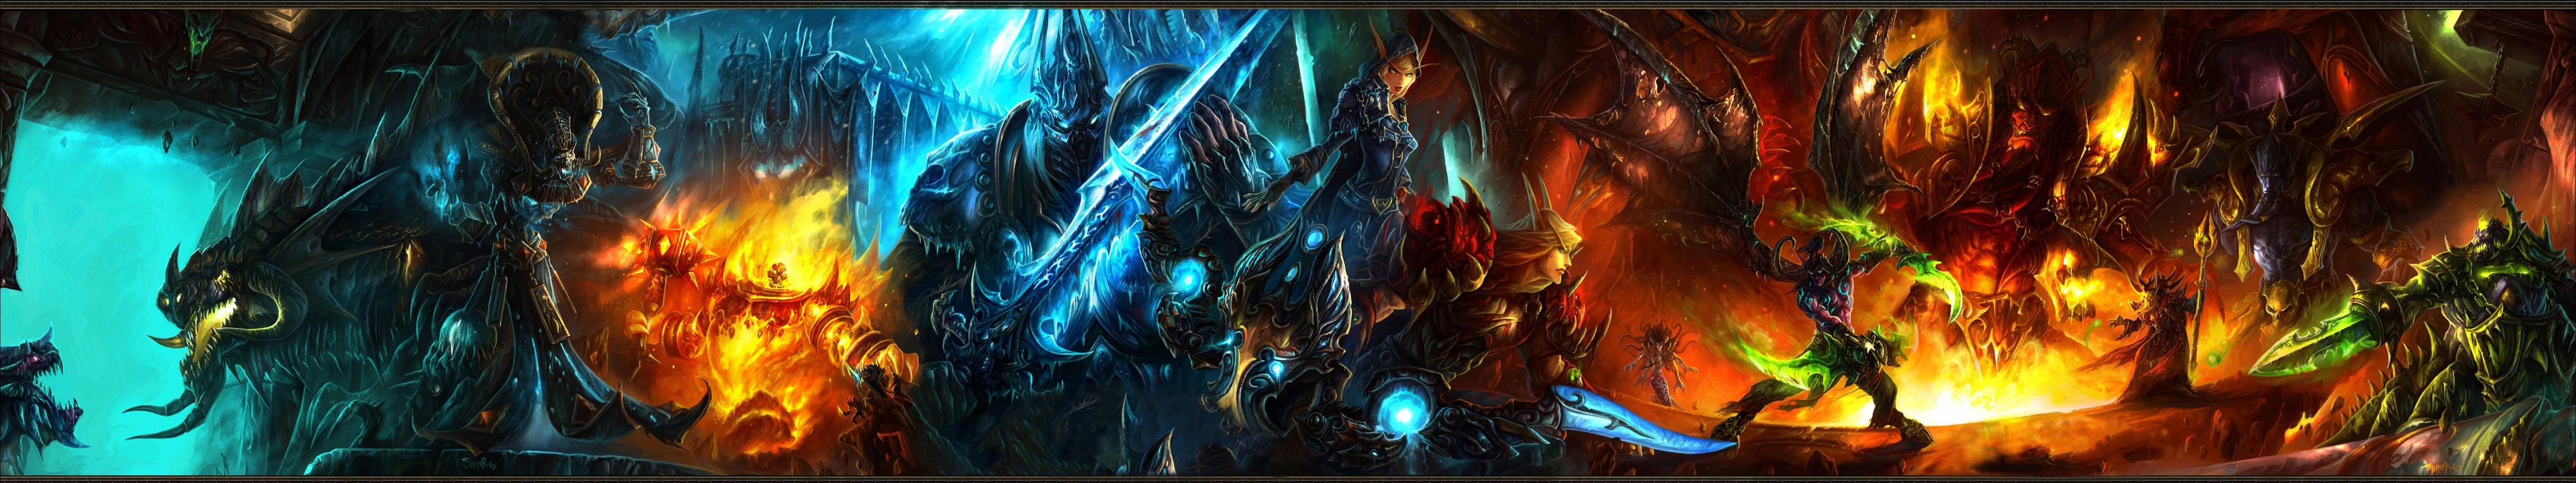 World Of Warcraft Wrath Of The Lich King World Of Warcraft Arthas Video Games Video Game Art 4723x886